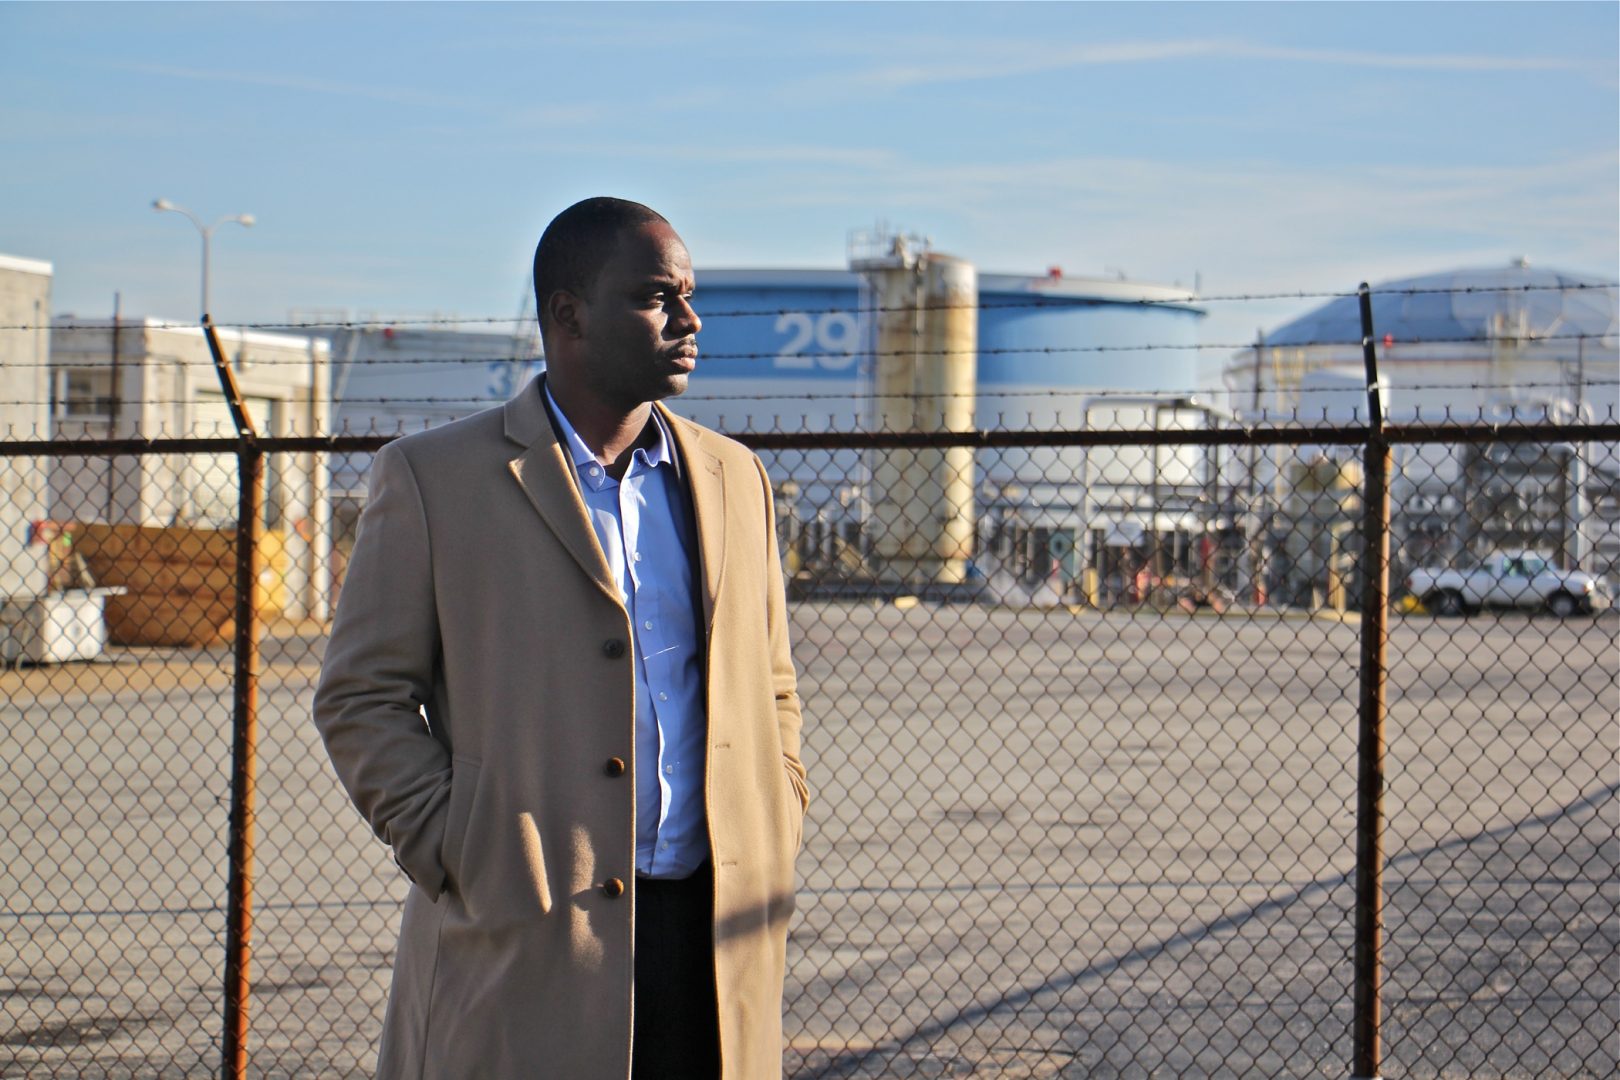 Bilal Motley worked at the Philadelphia Energy Solutions refinery for 13 years before an explosion and fire closed the plant. 